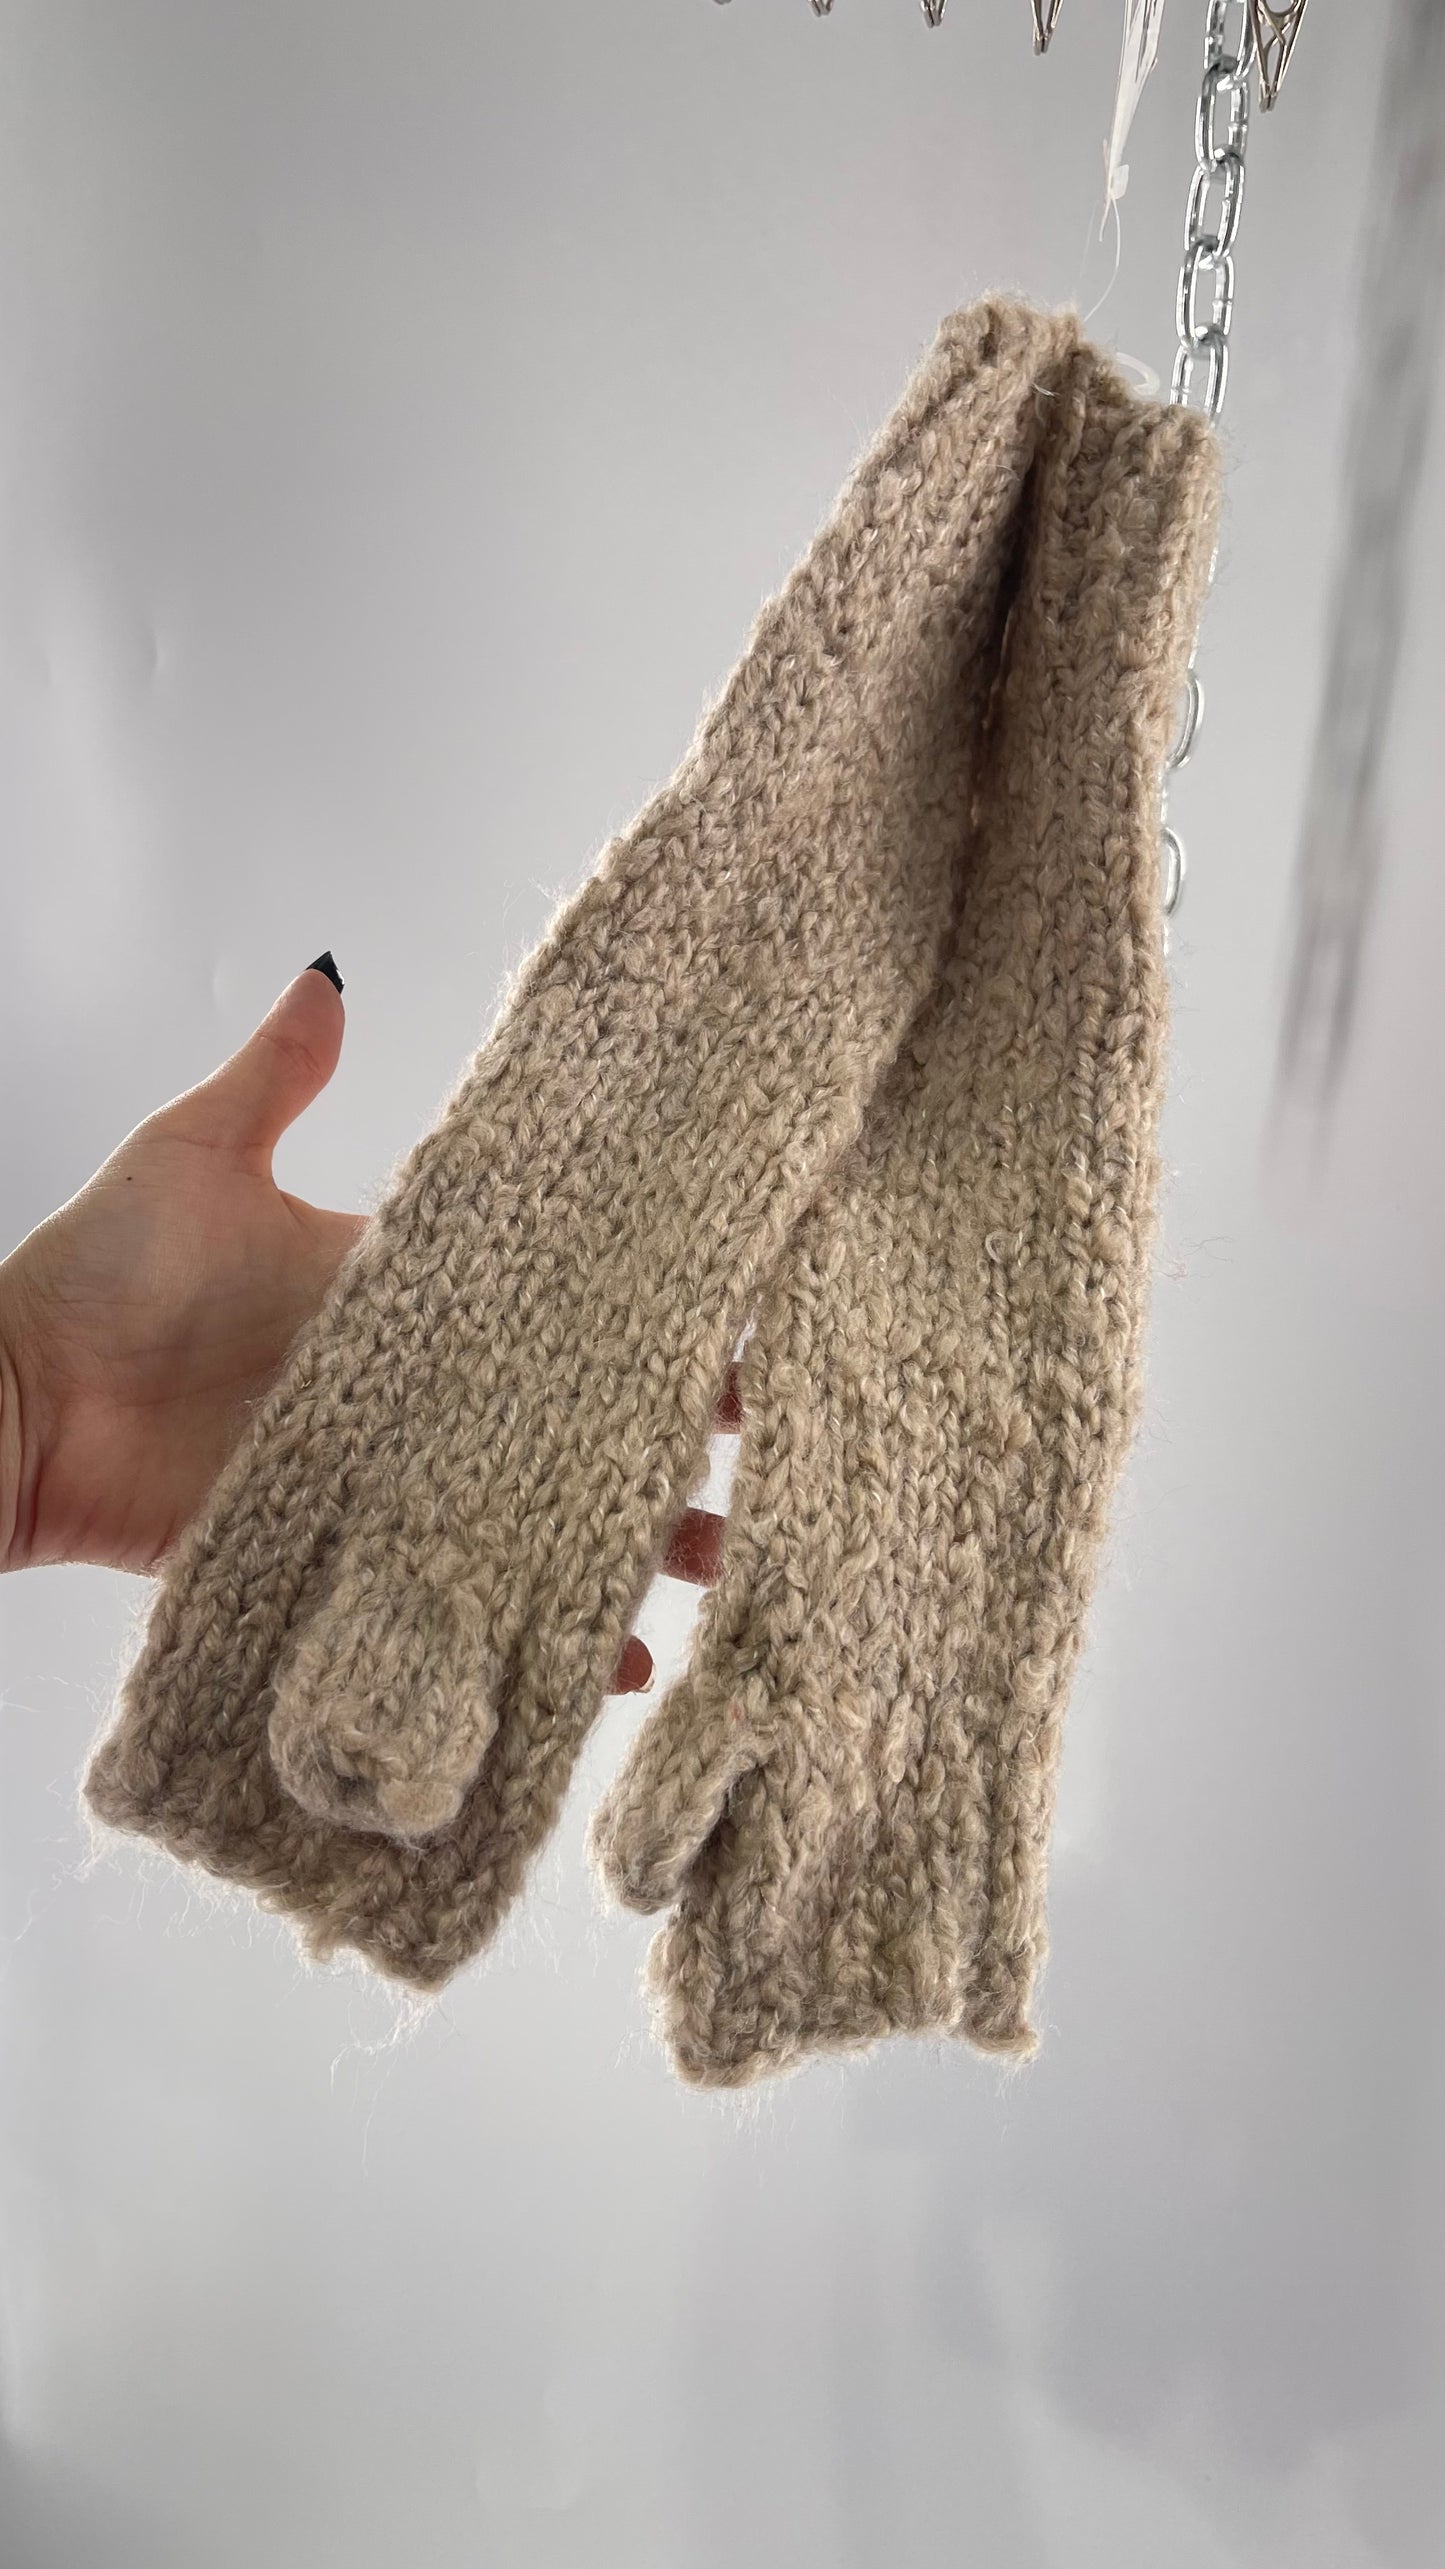 Urban Outfitters Beige/Oatmeal Knit Arm Warmer/Glove with Covered Palm, Thumb Hole